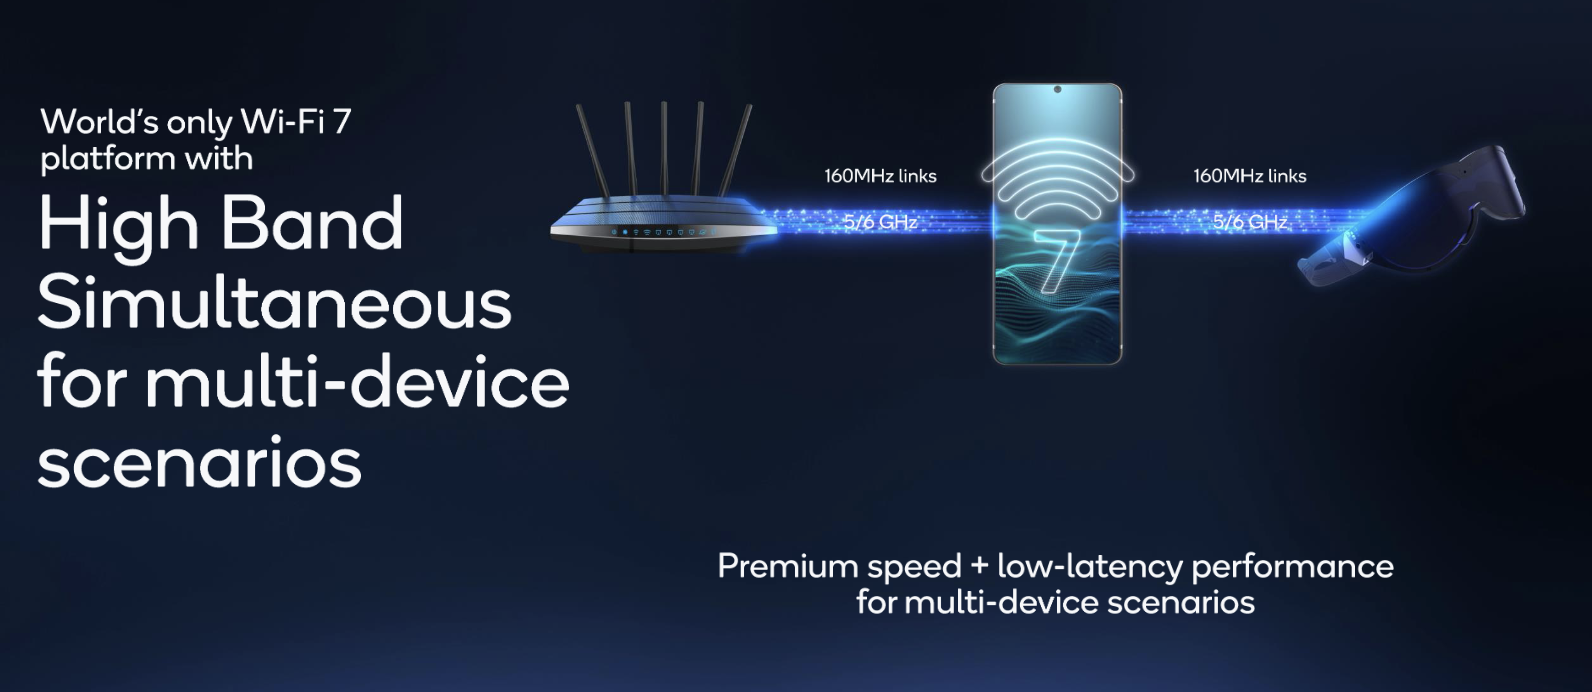 SDMC Released the First Commercial Wi-Fi 7 Converged Smart Gateway